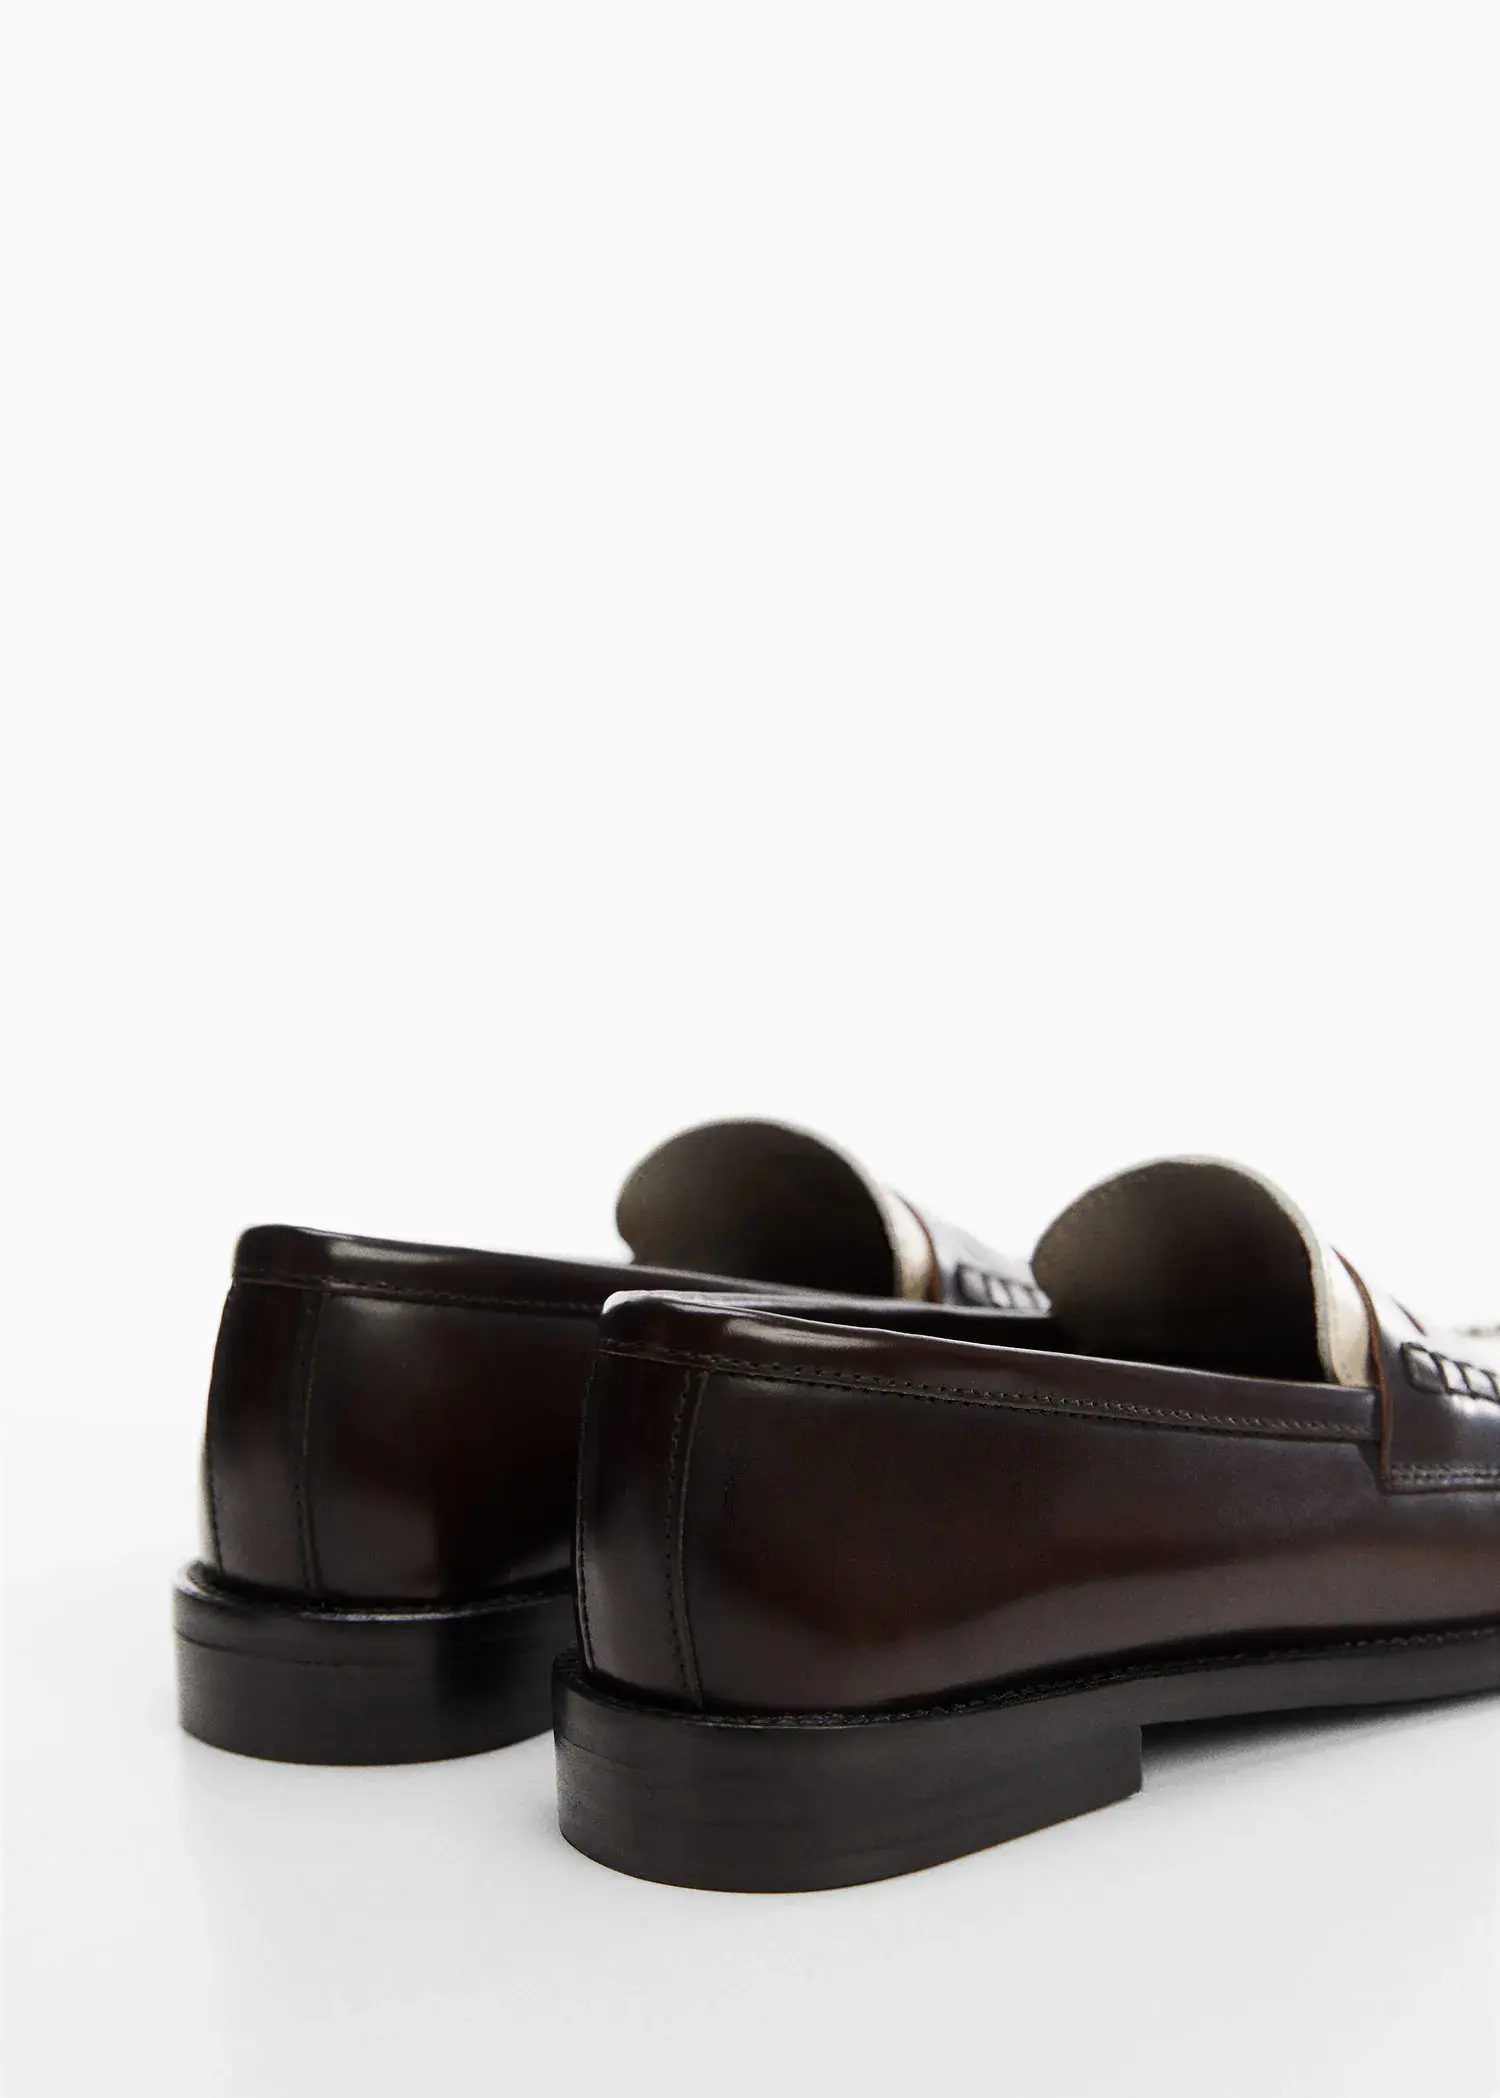 Mango Leather penny loafers. 3